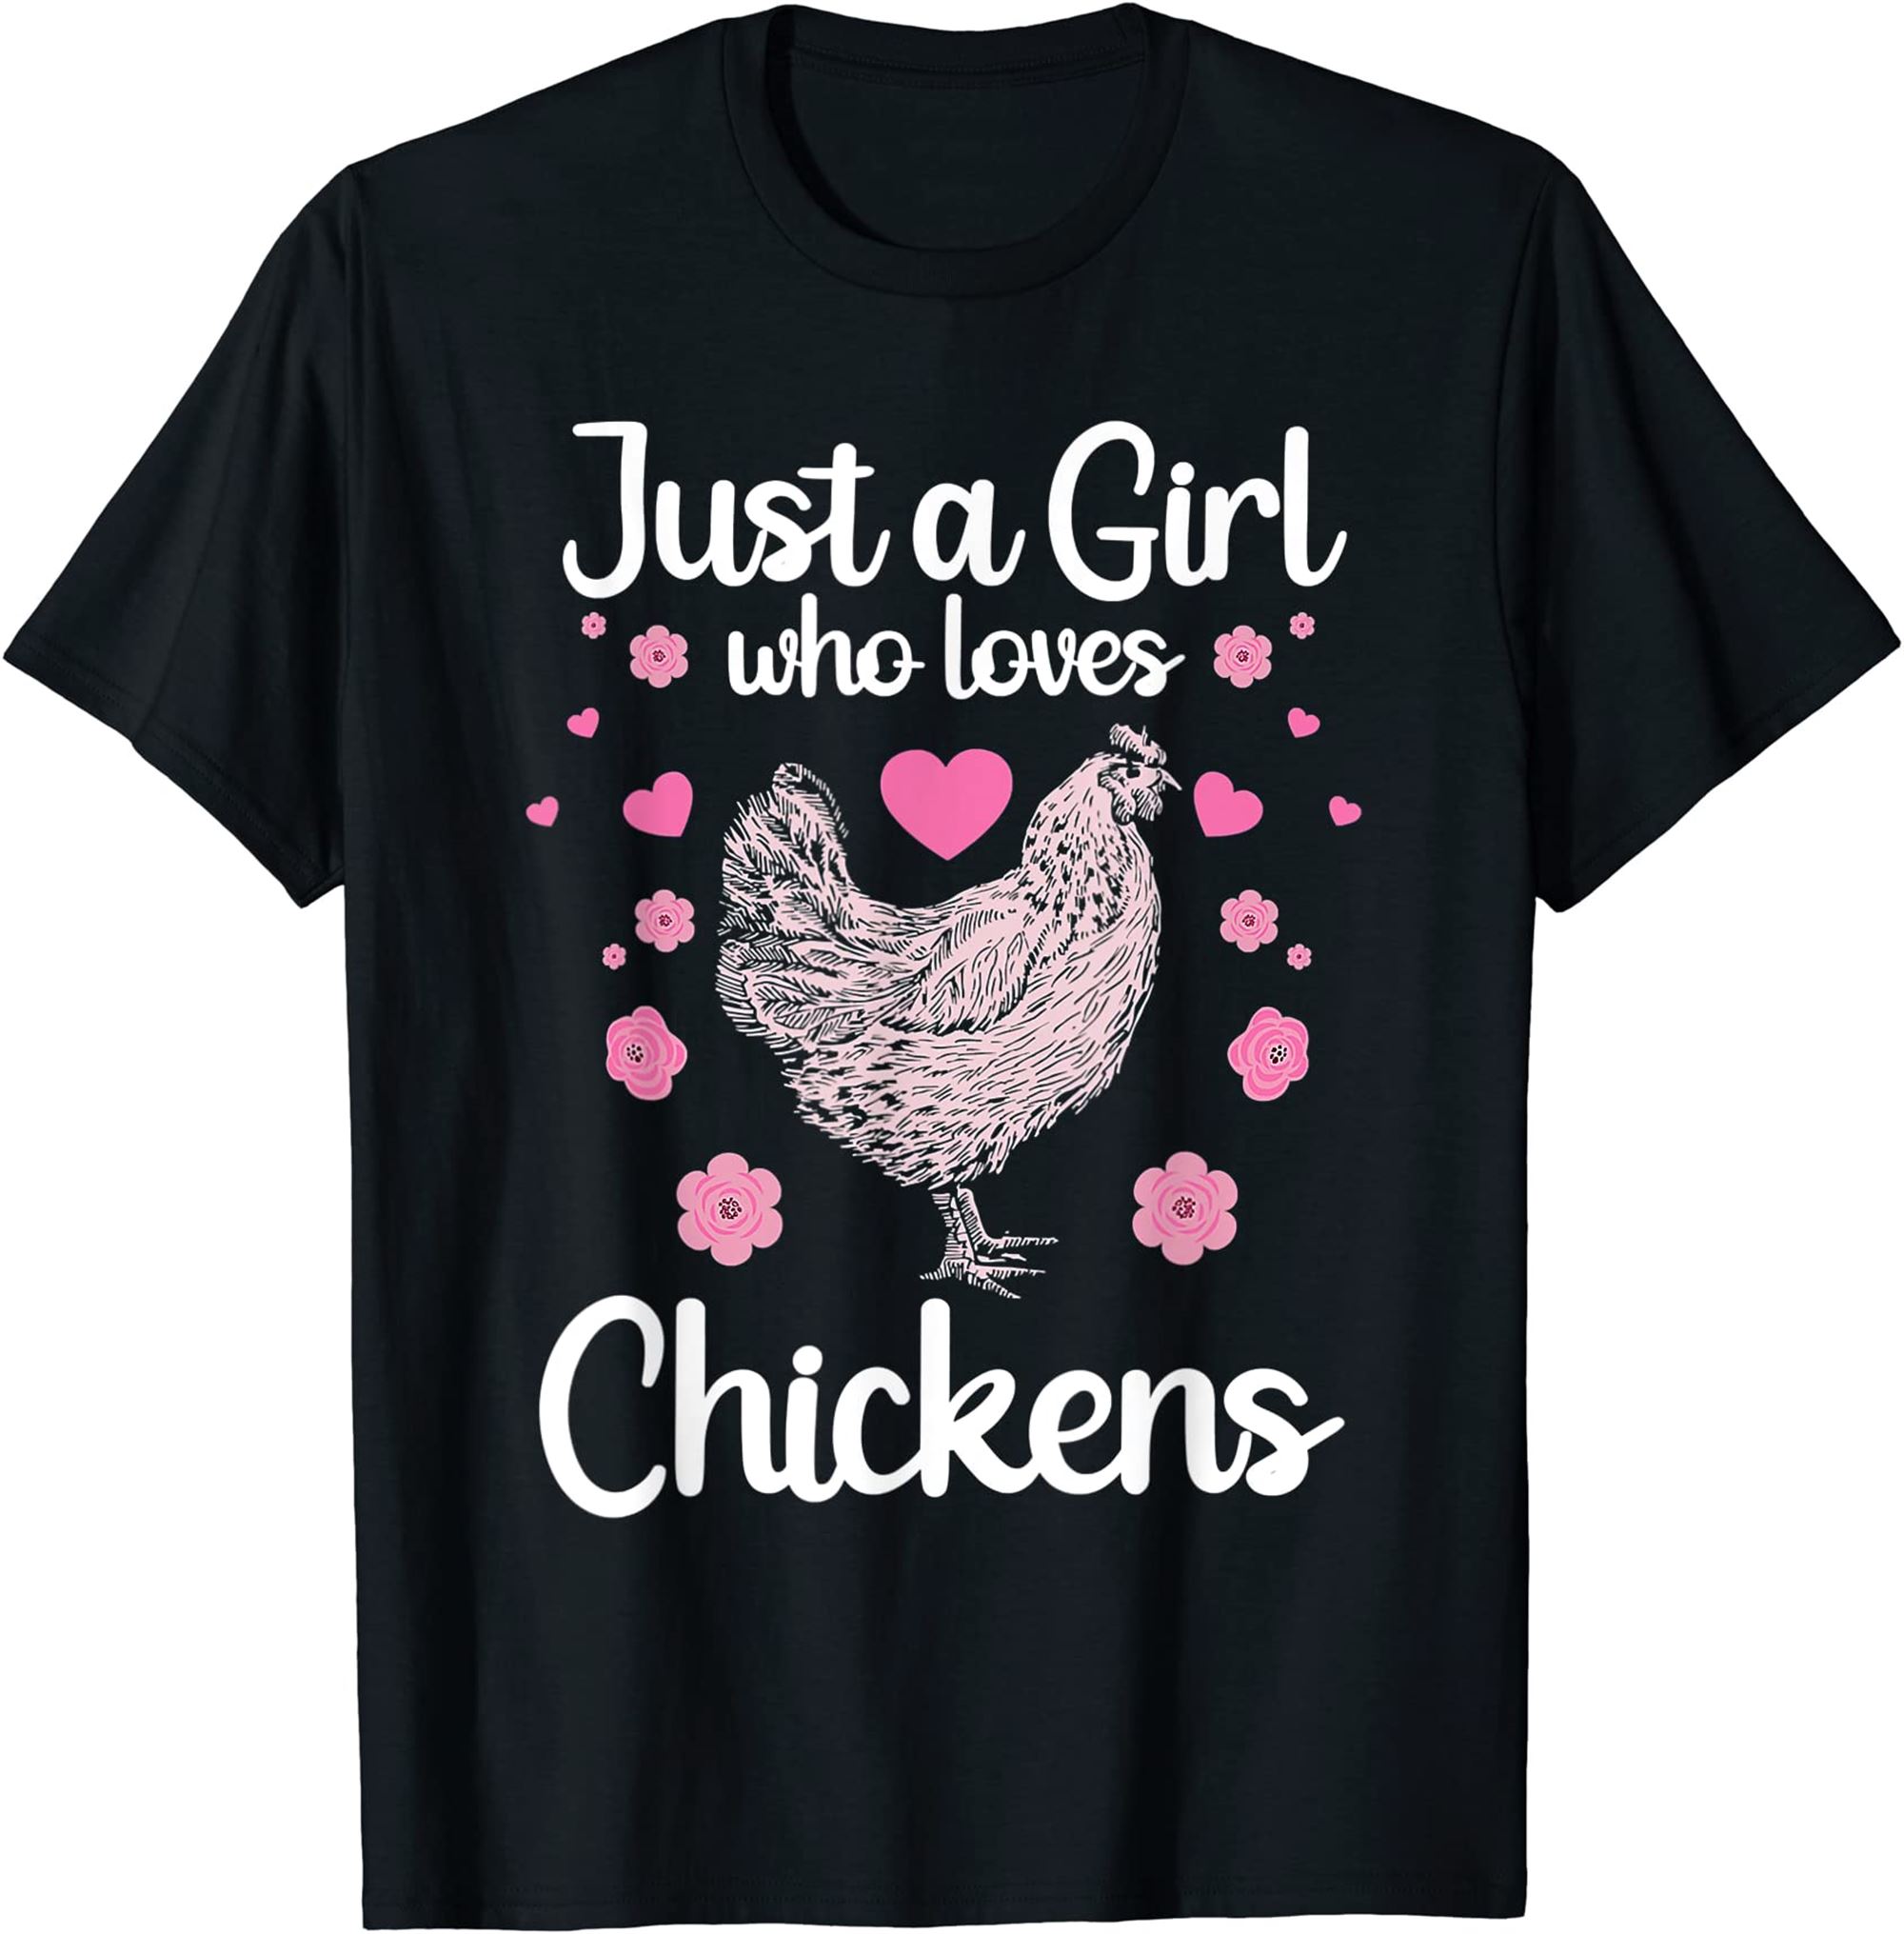 Funny Girl Chicken Design Mom Chicken Lover T-shirt Size Up To 5xl